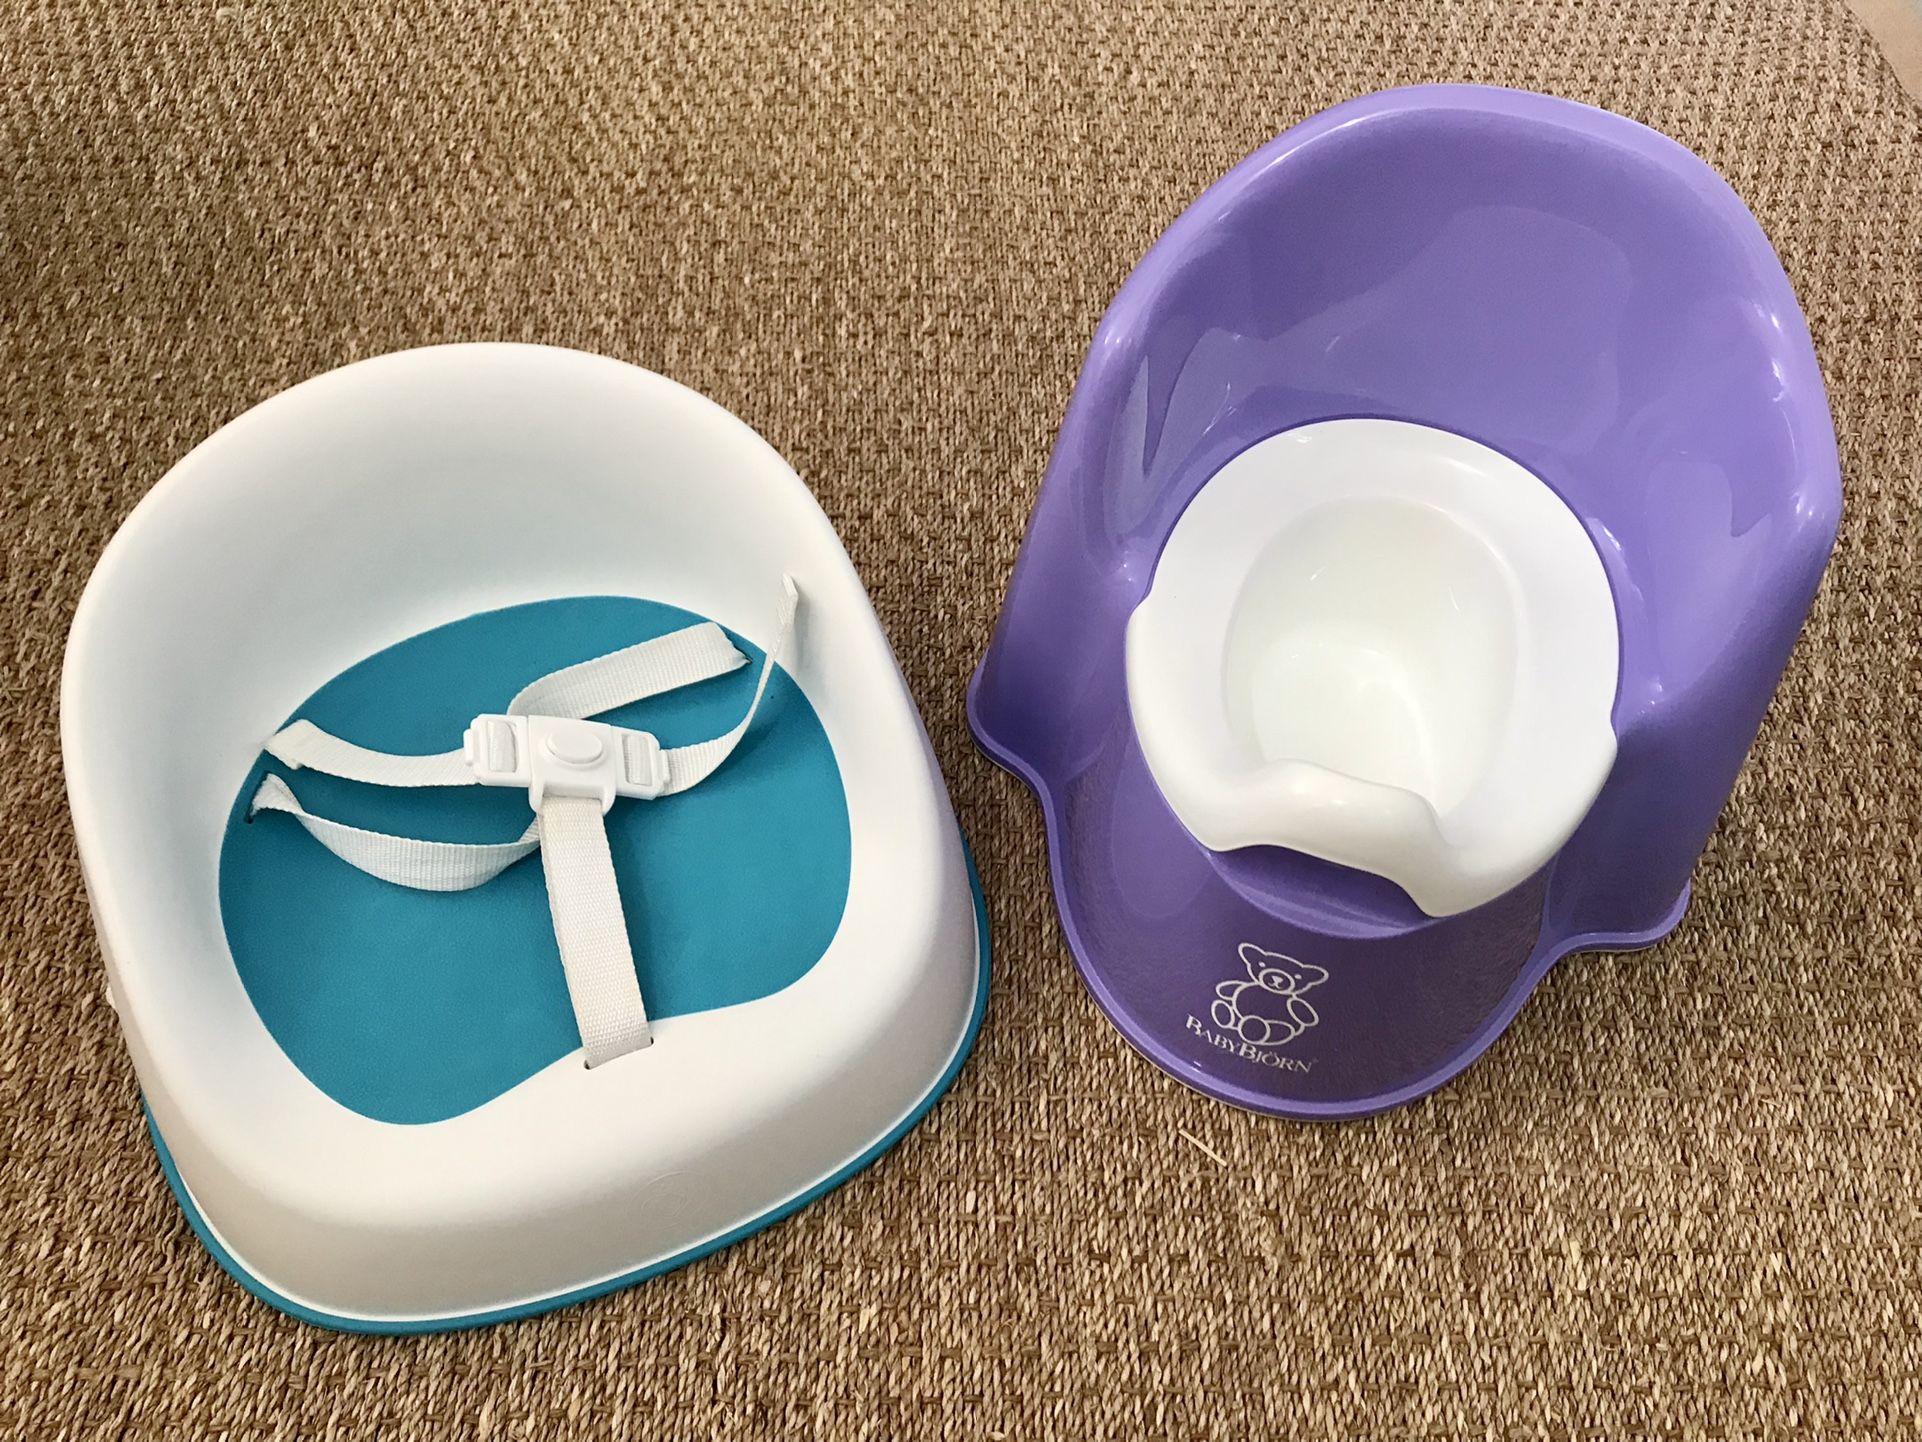 Baby Bjorn purple potty chair with back rest & Prince Lionheart booster seat combo. Both items in like new condition. $20